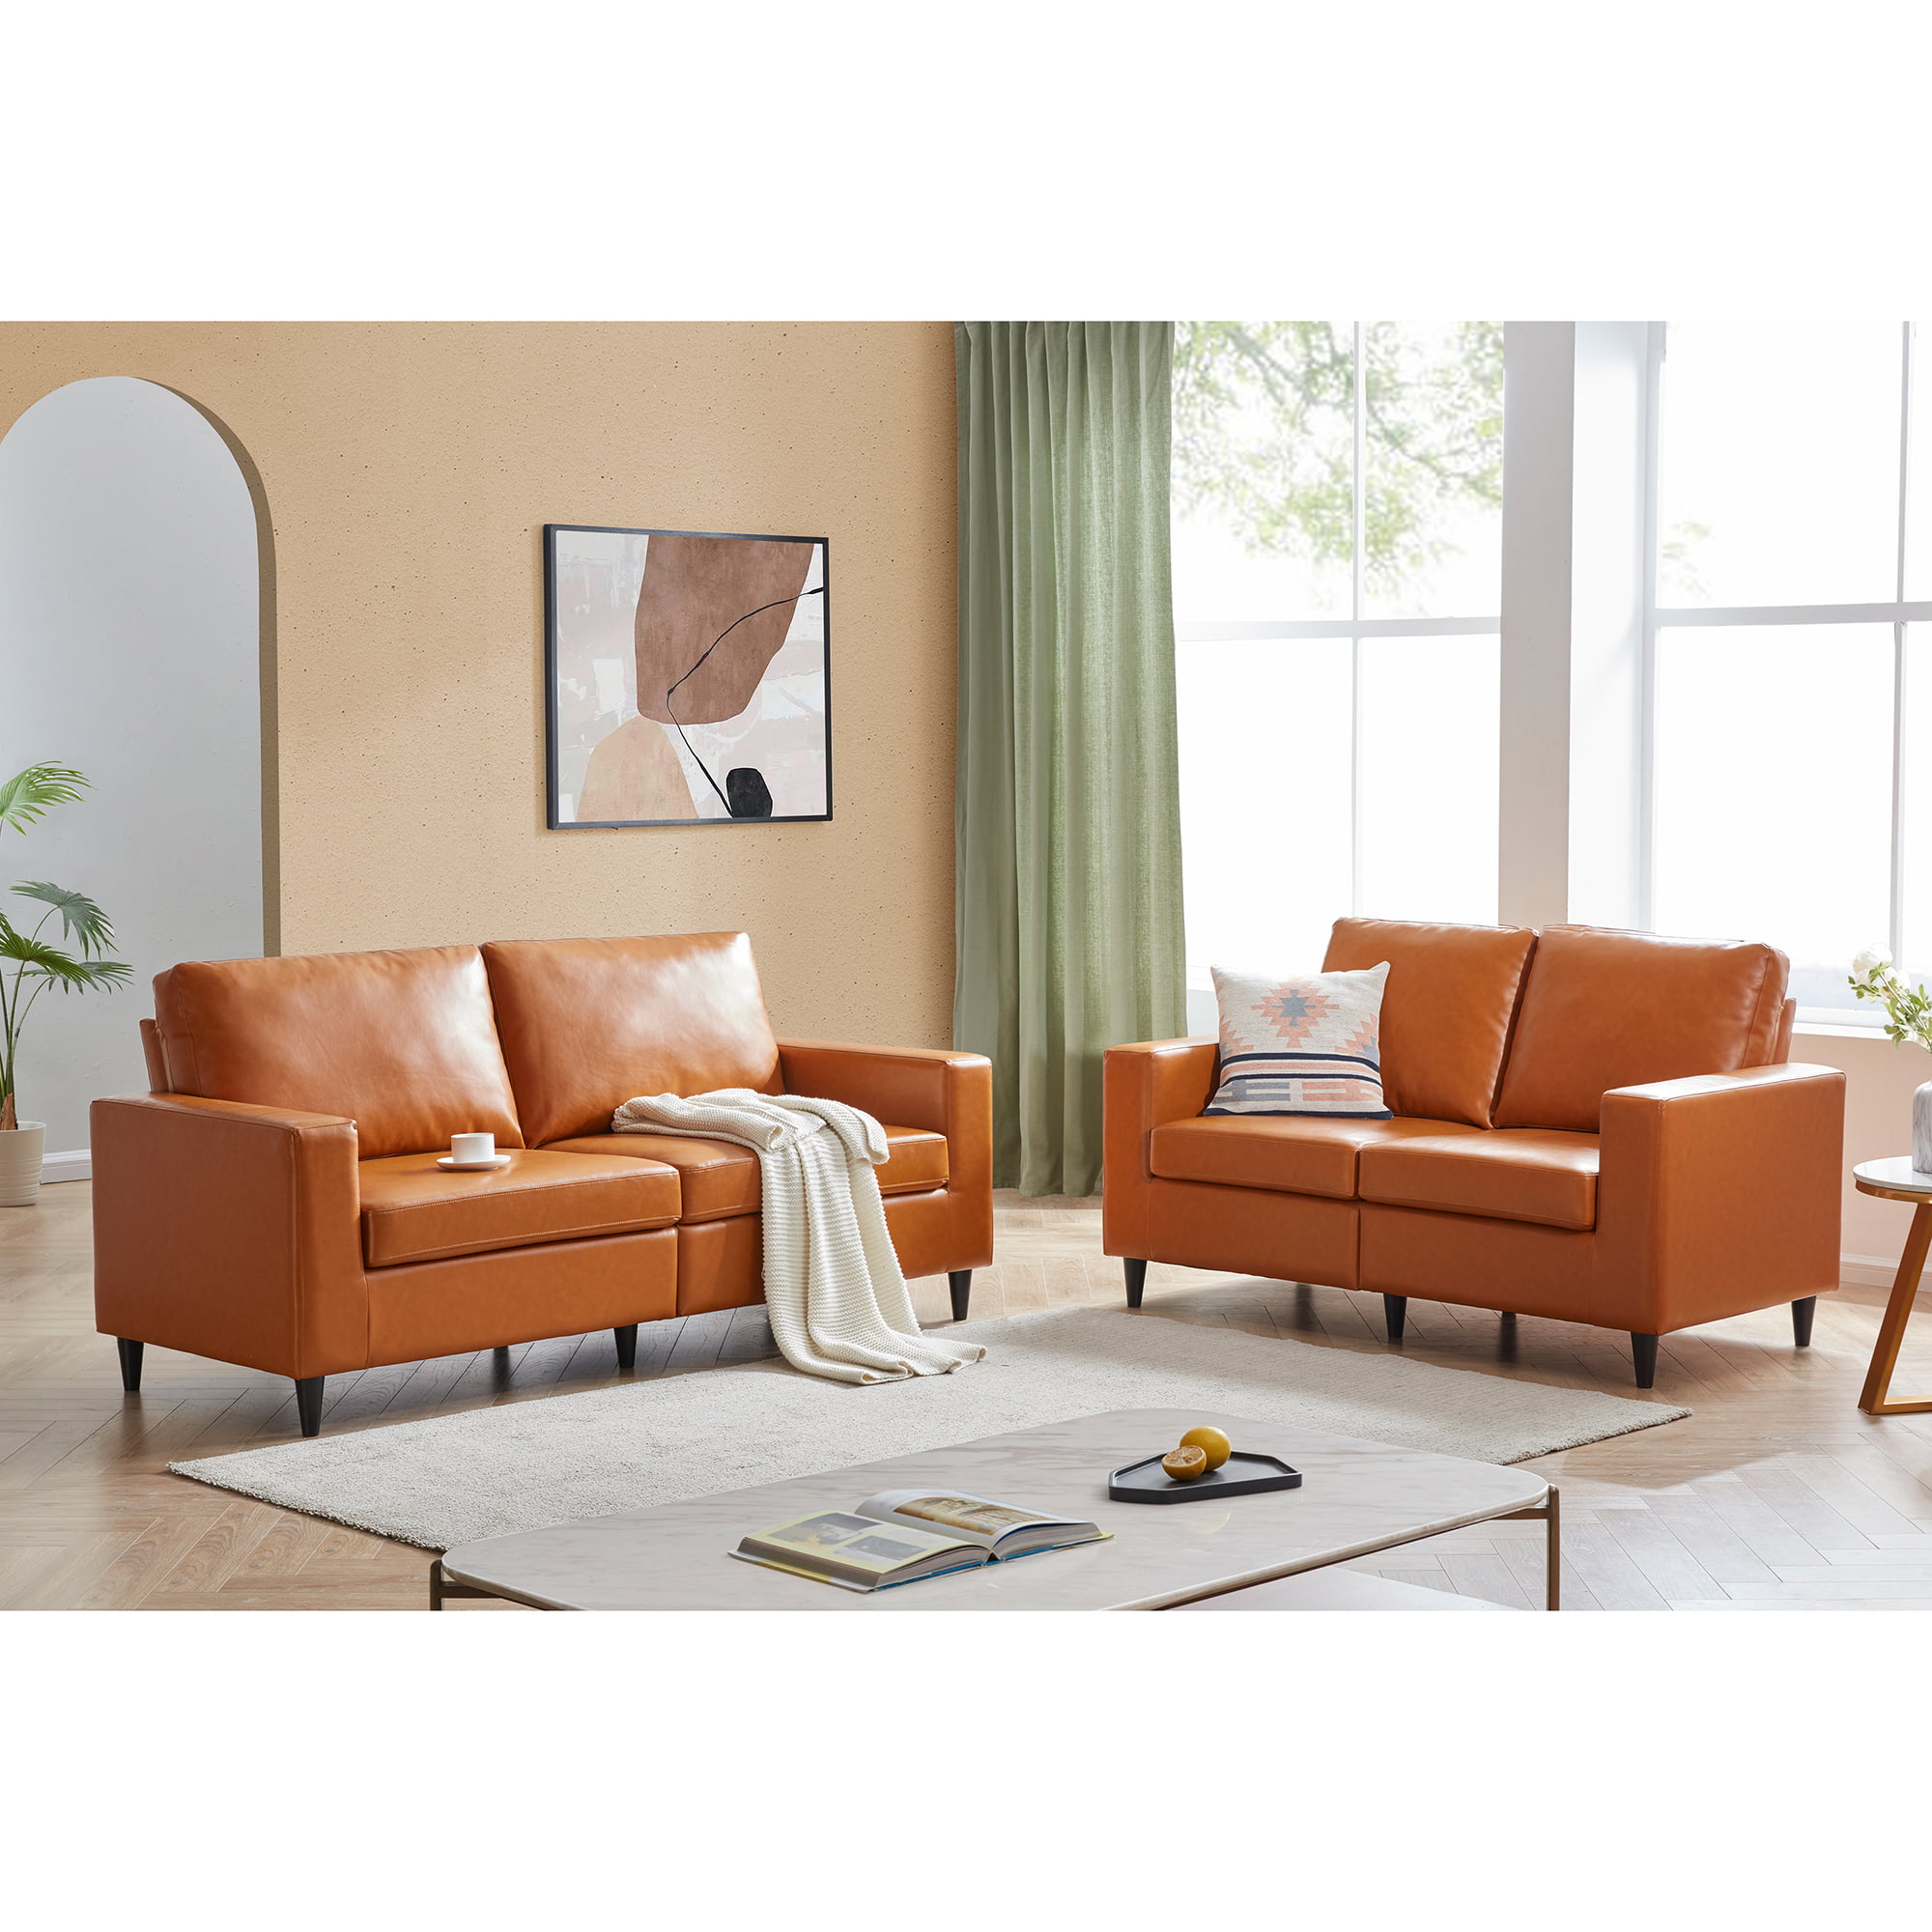 Veryke Modern PU Leather Upholstered Living Room Sofa Set 3 Seat Couch and Loveseat for Home Office - Brown